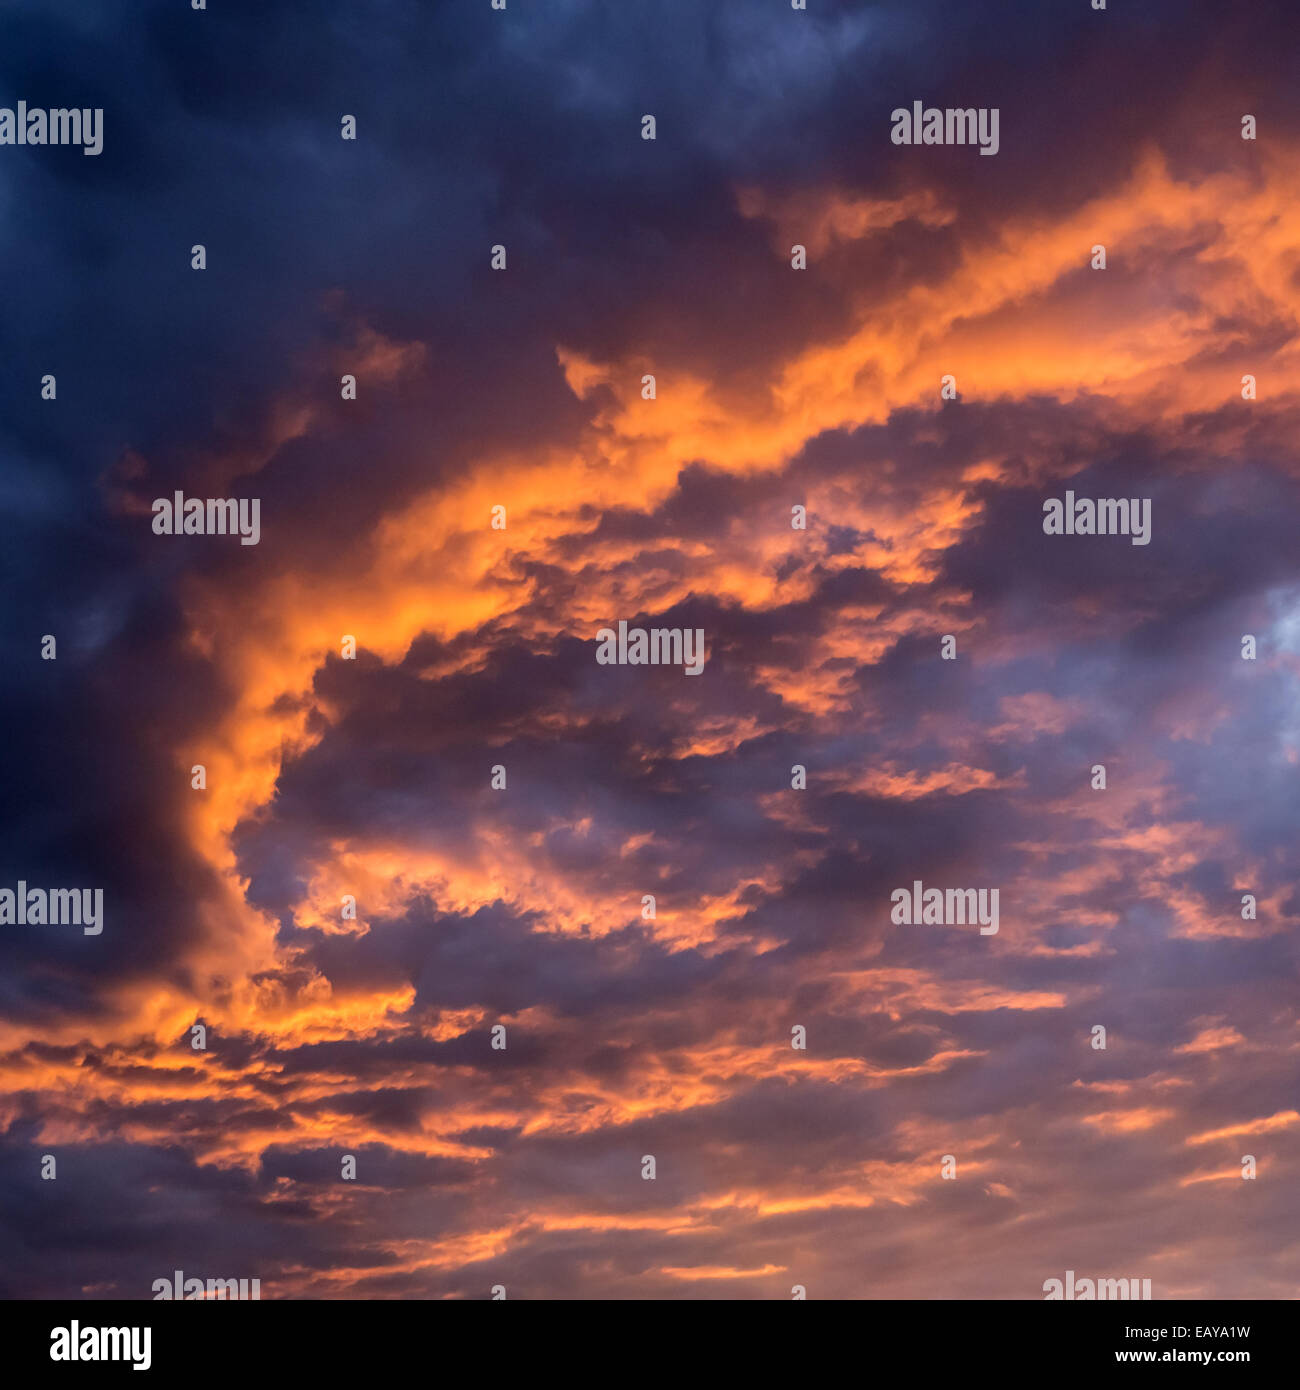 sunset sky with blue, red and orange colors Stock Photo